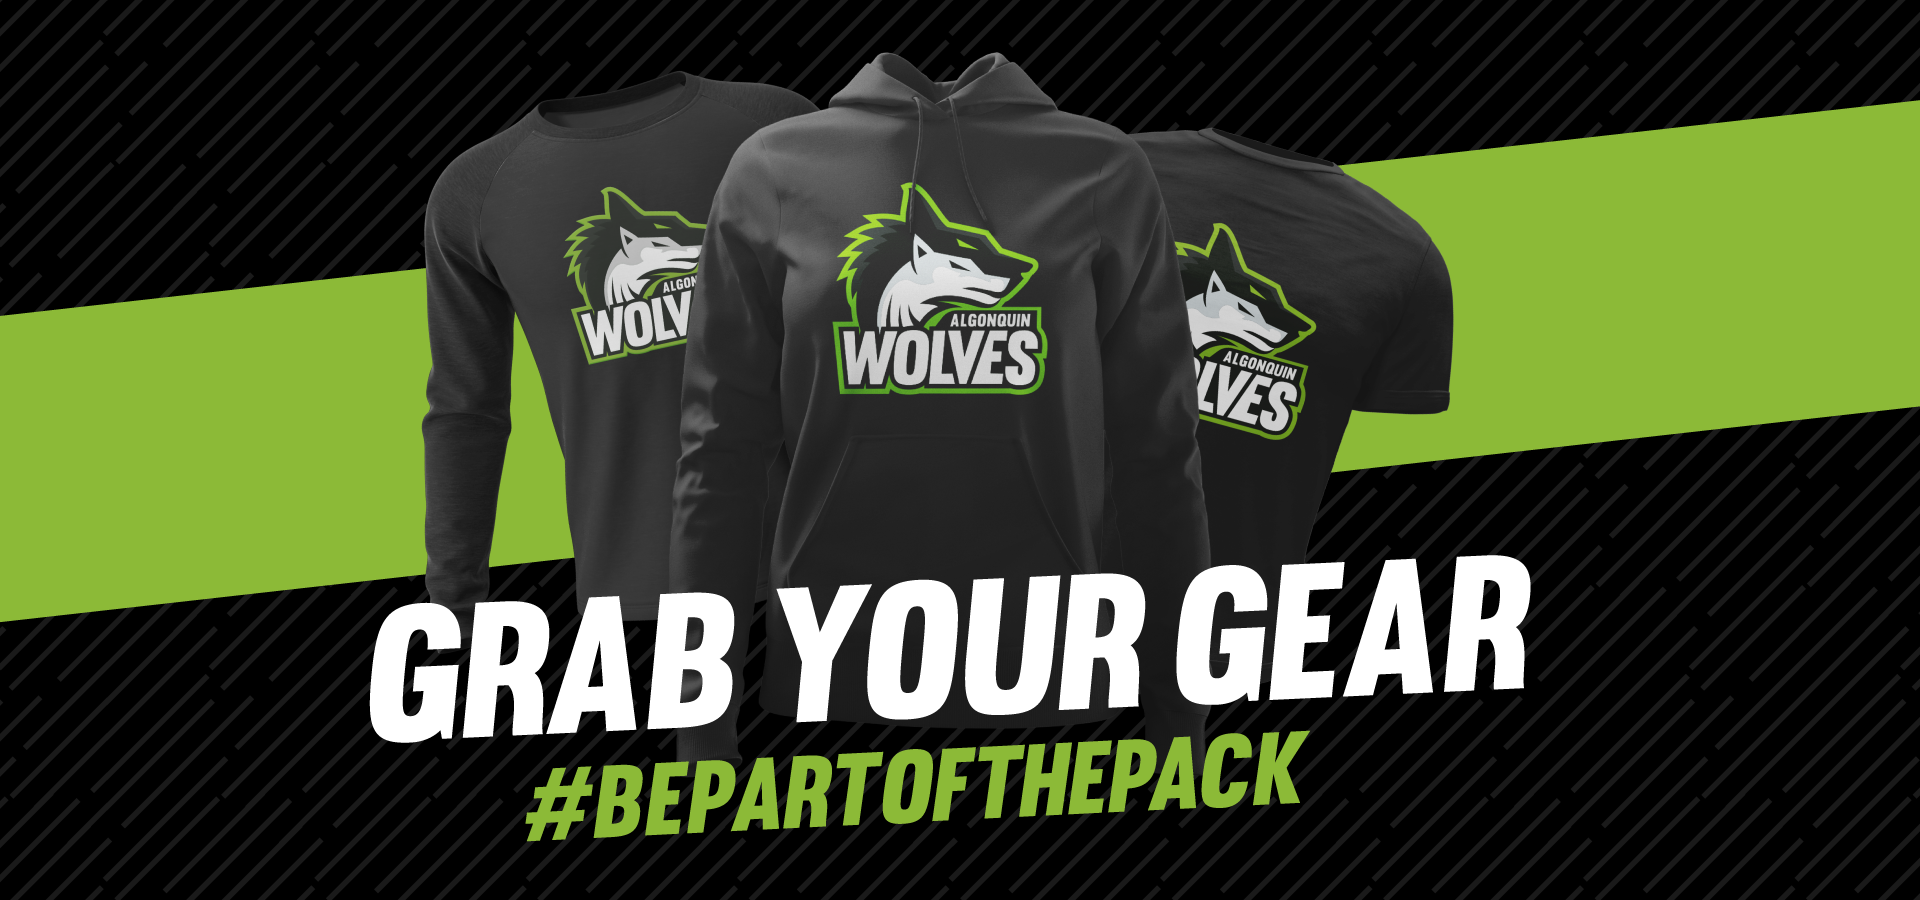 Grab Your Gear. #BEPARTOFTHEPACK Wolves T-shirt, Long Sleeve Shirt, and Hoodie pictured.